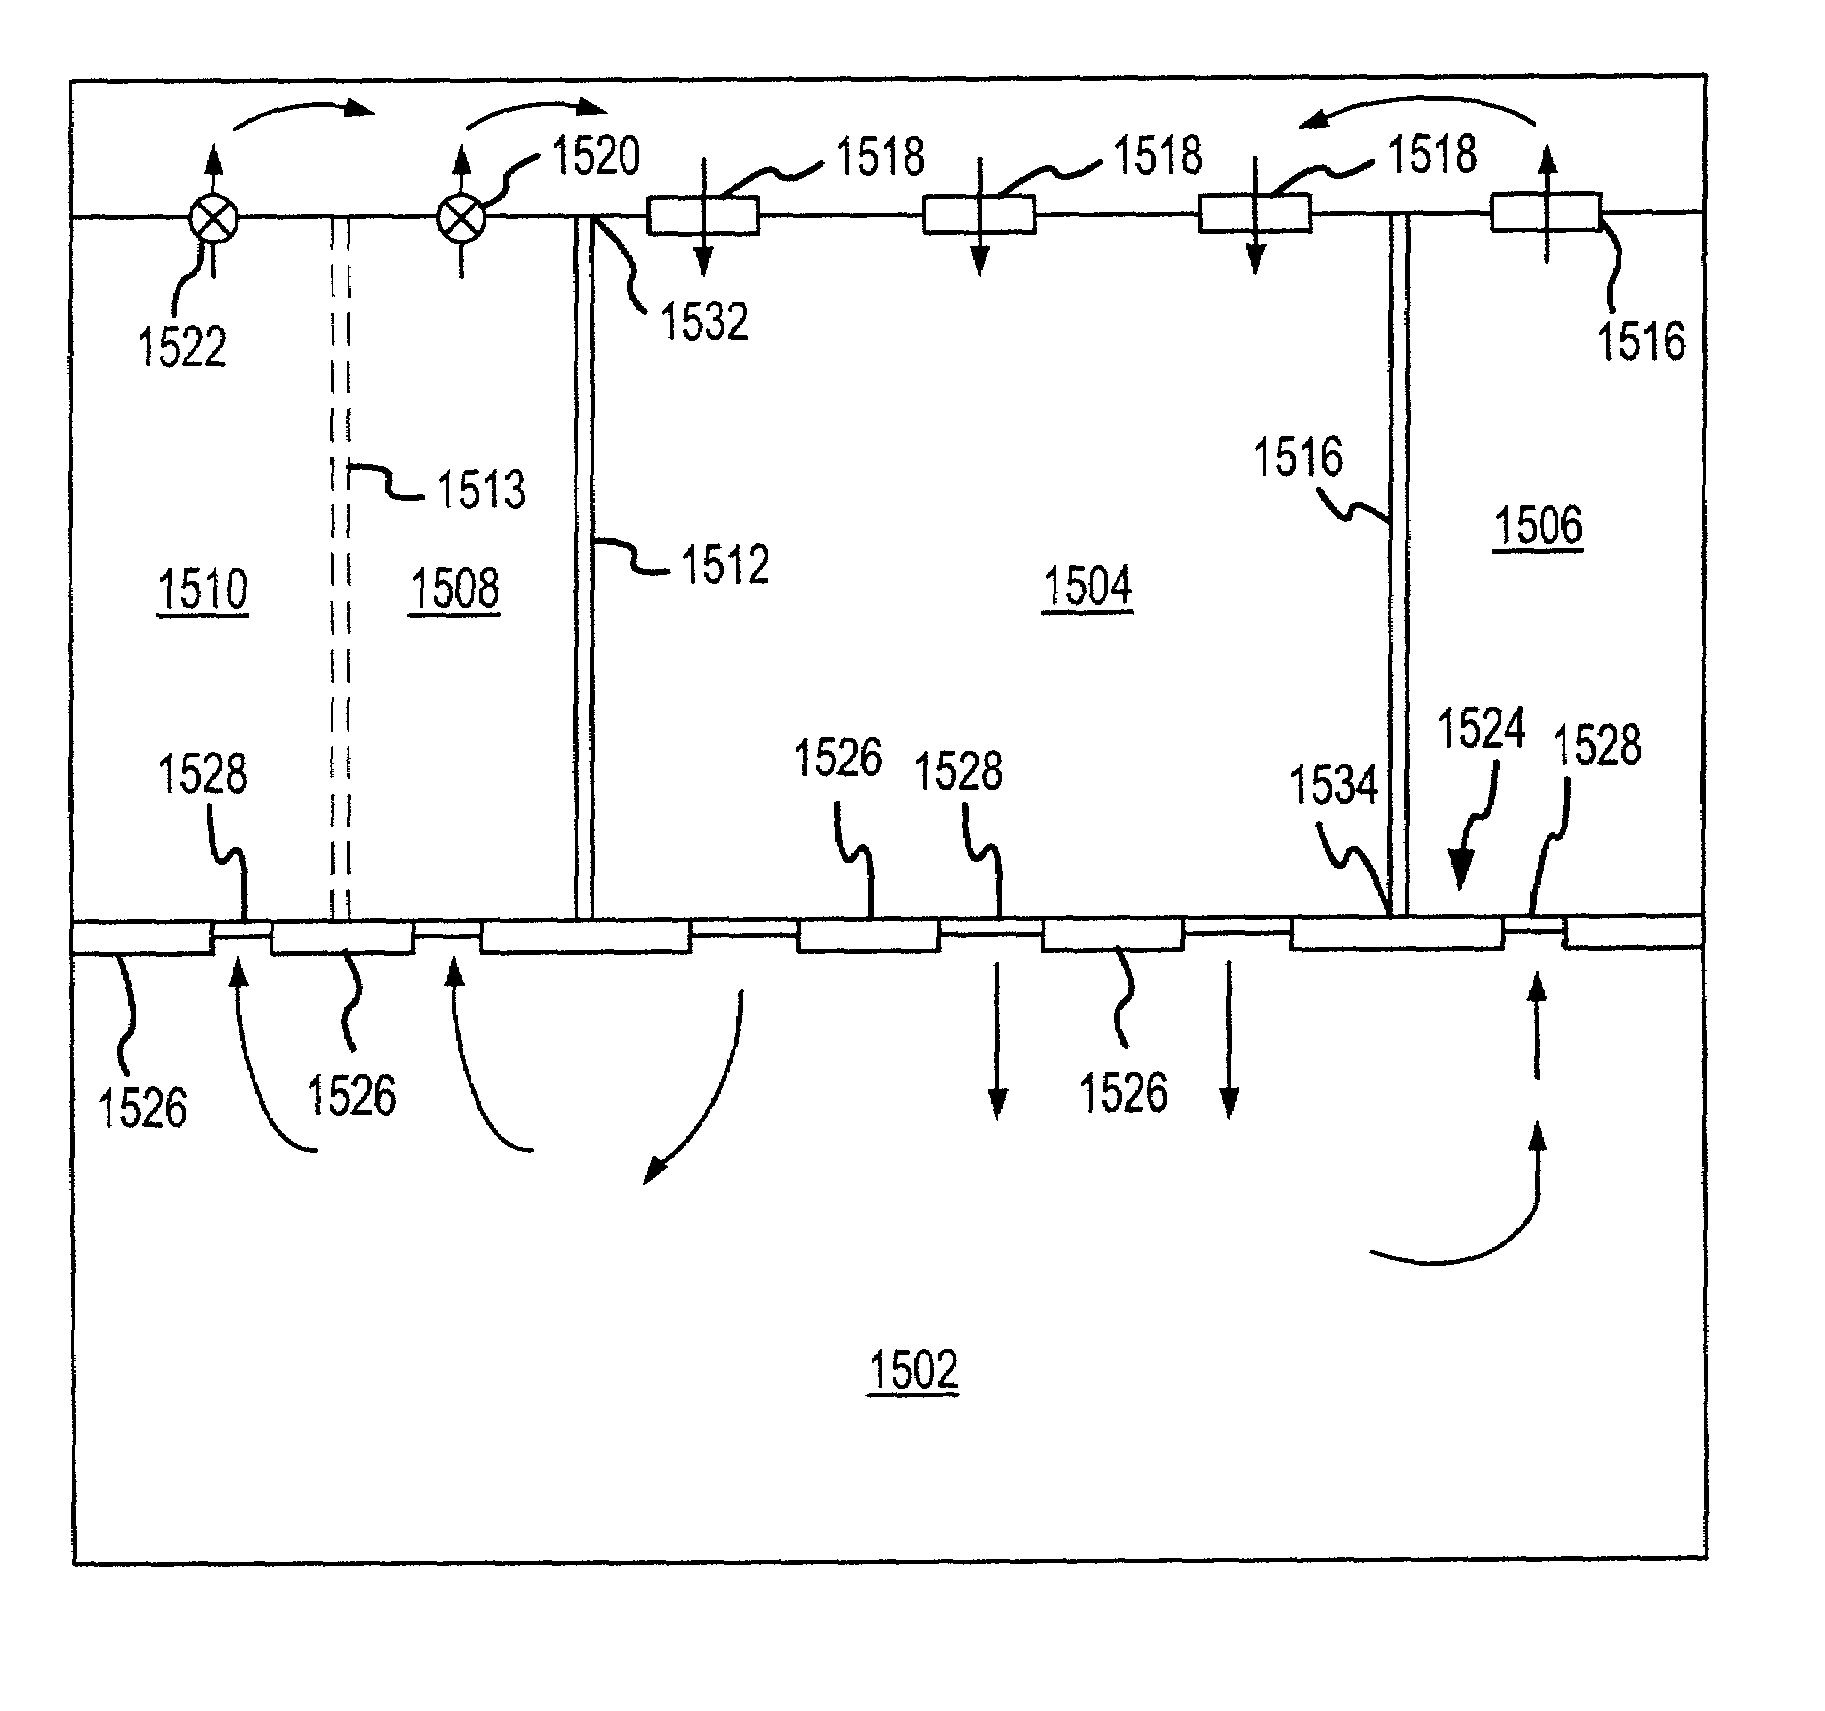 Clean room facility and construction method